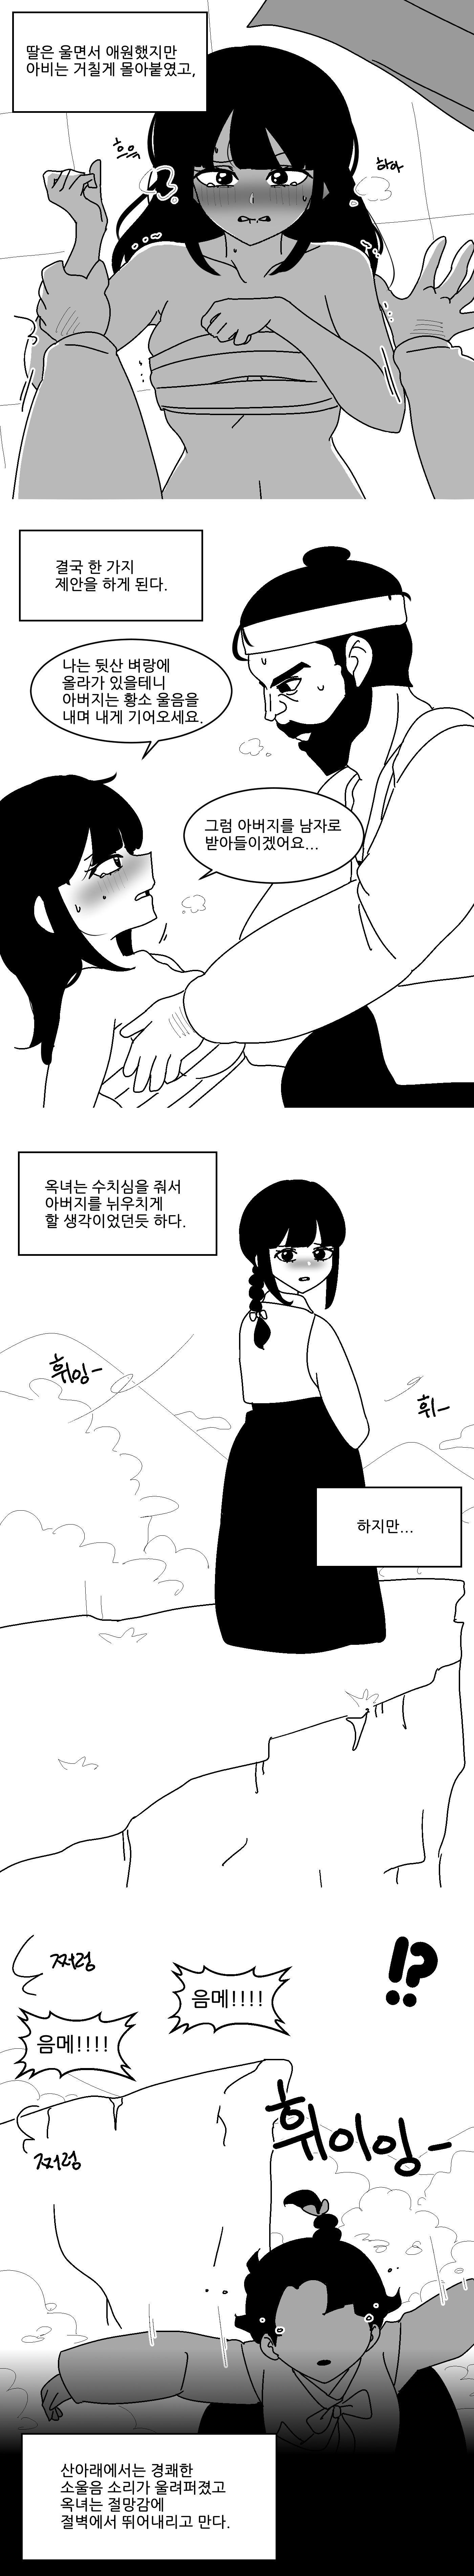 The Story of Korean Near-Friendly People